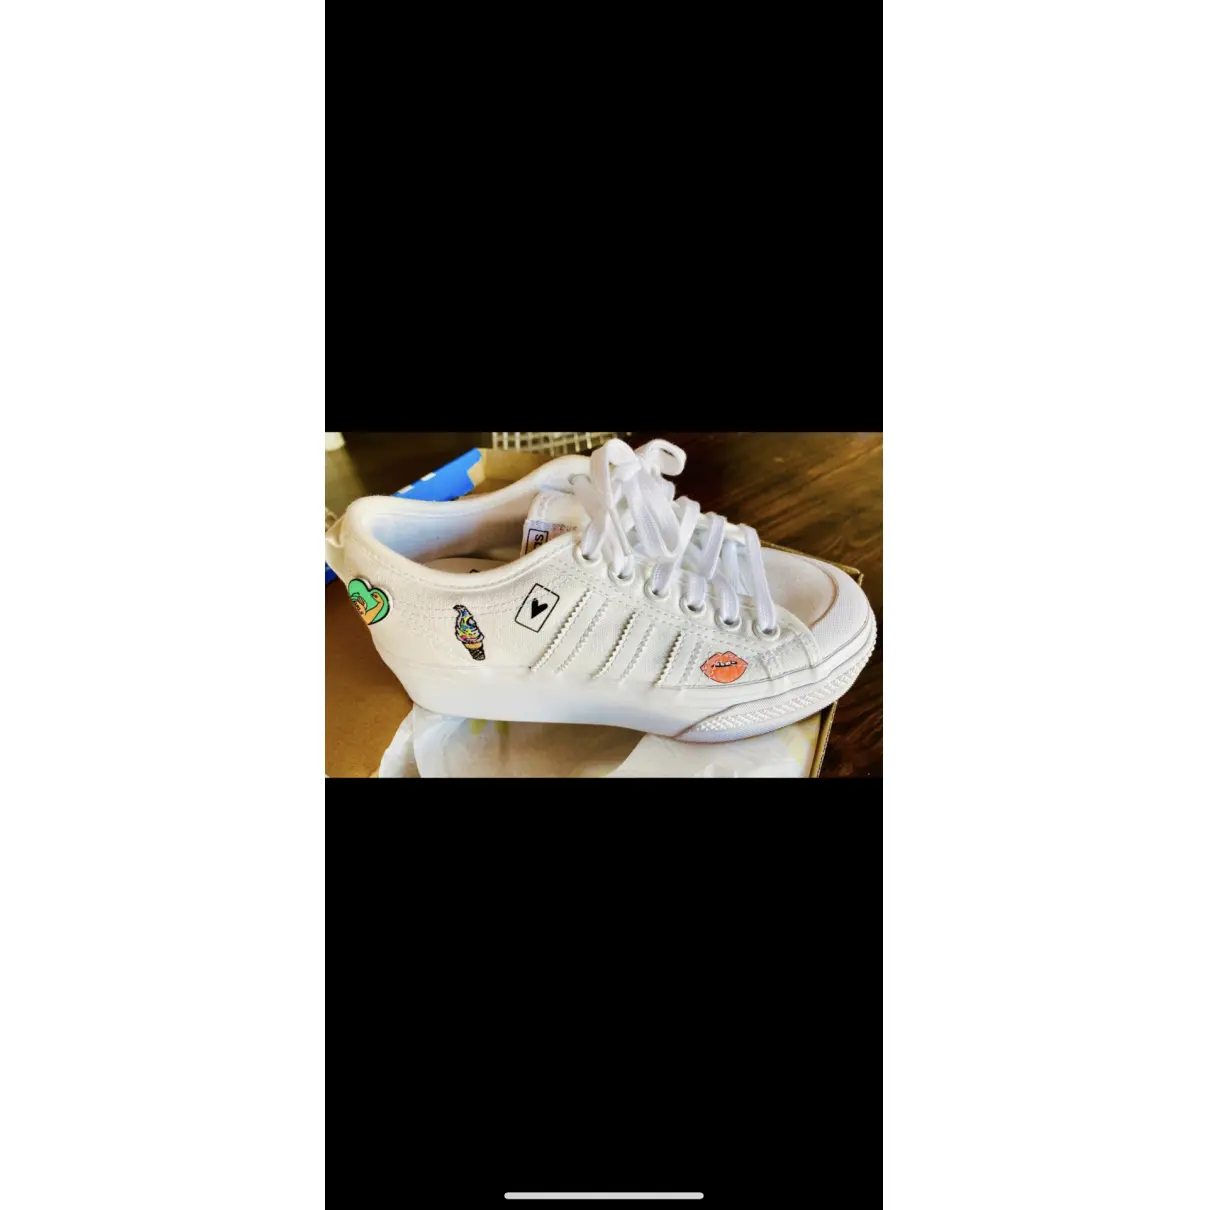 Buy Adidas Cloth trainers online